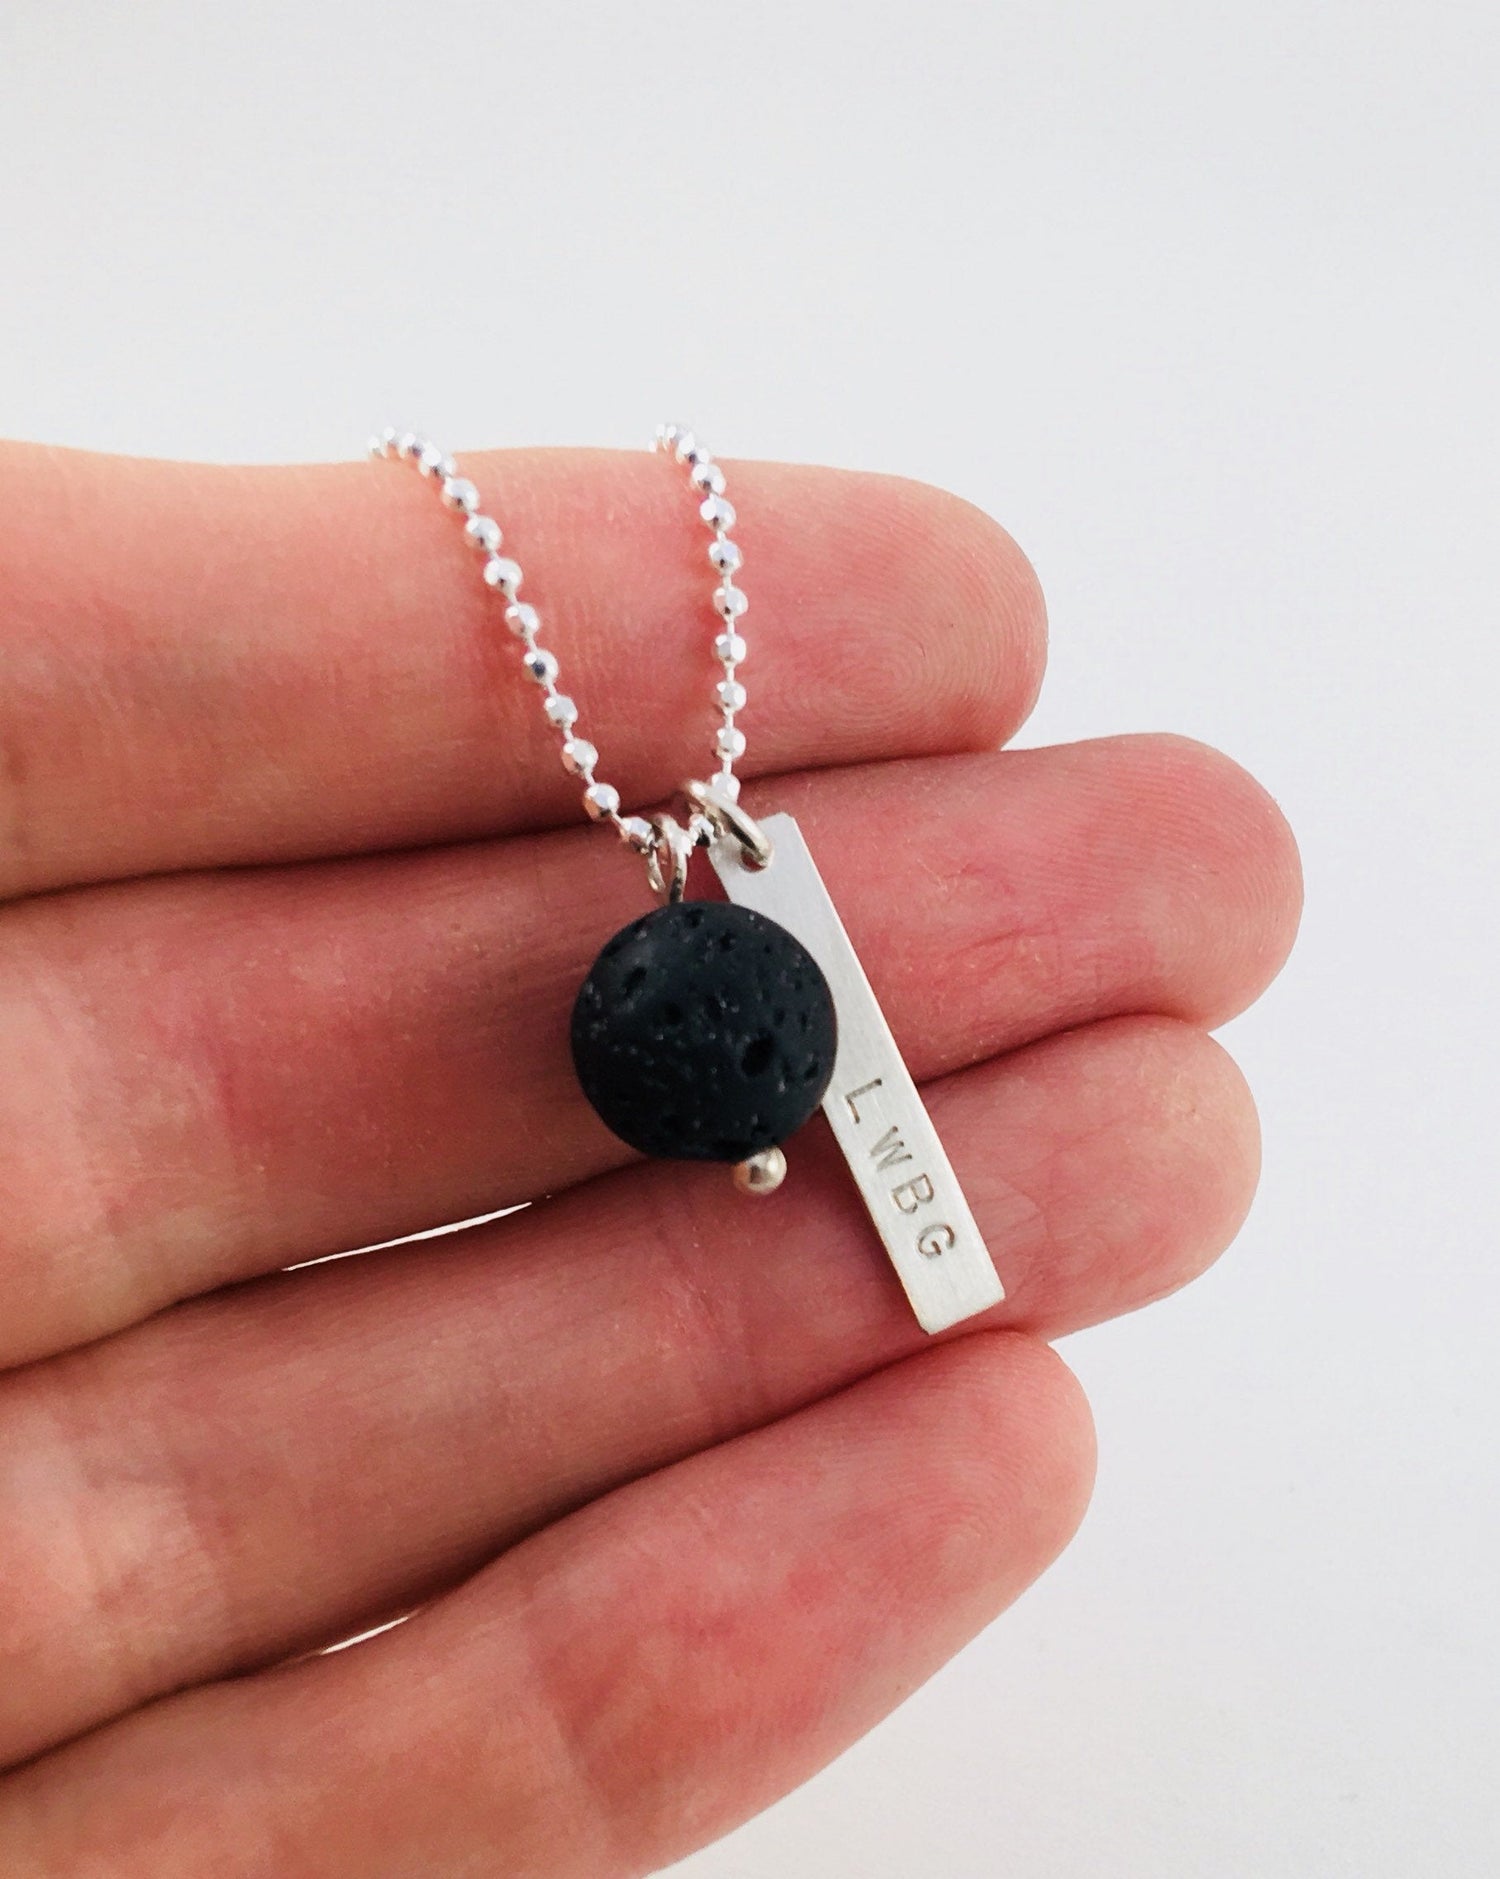 Shine On Bar Necklace Name Plate Hand Stamped Letter Flat Pendant Solid Sterling Silver Family Push Present trend lava rock essential oil